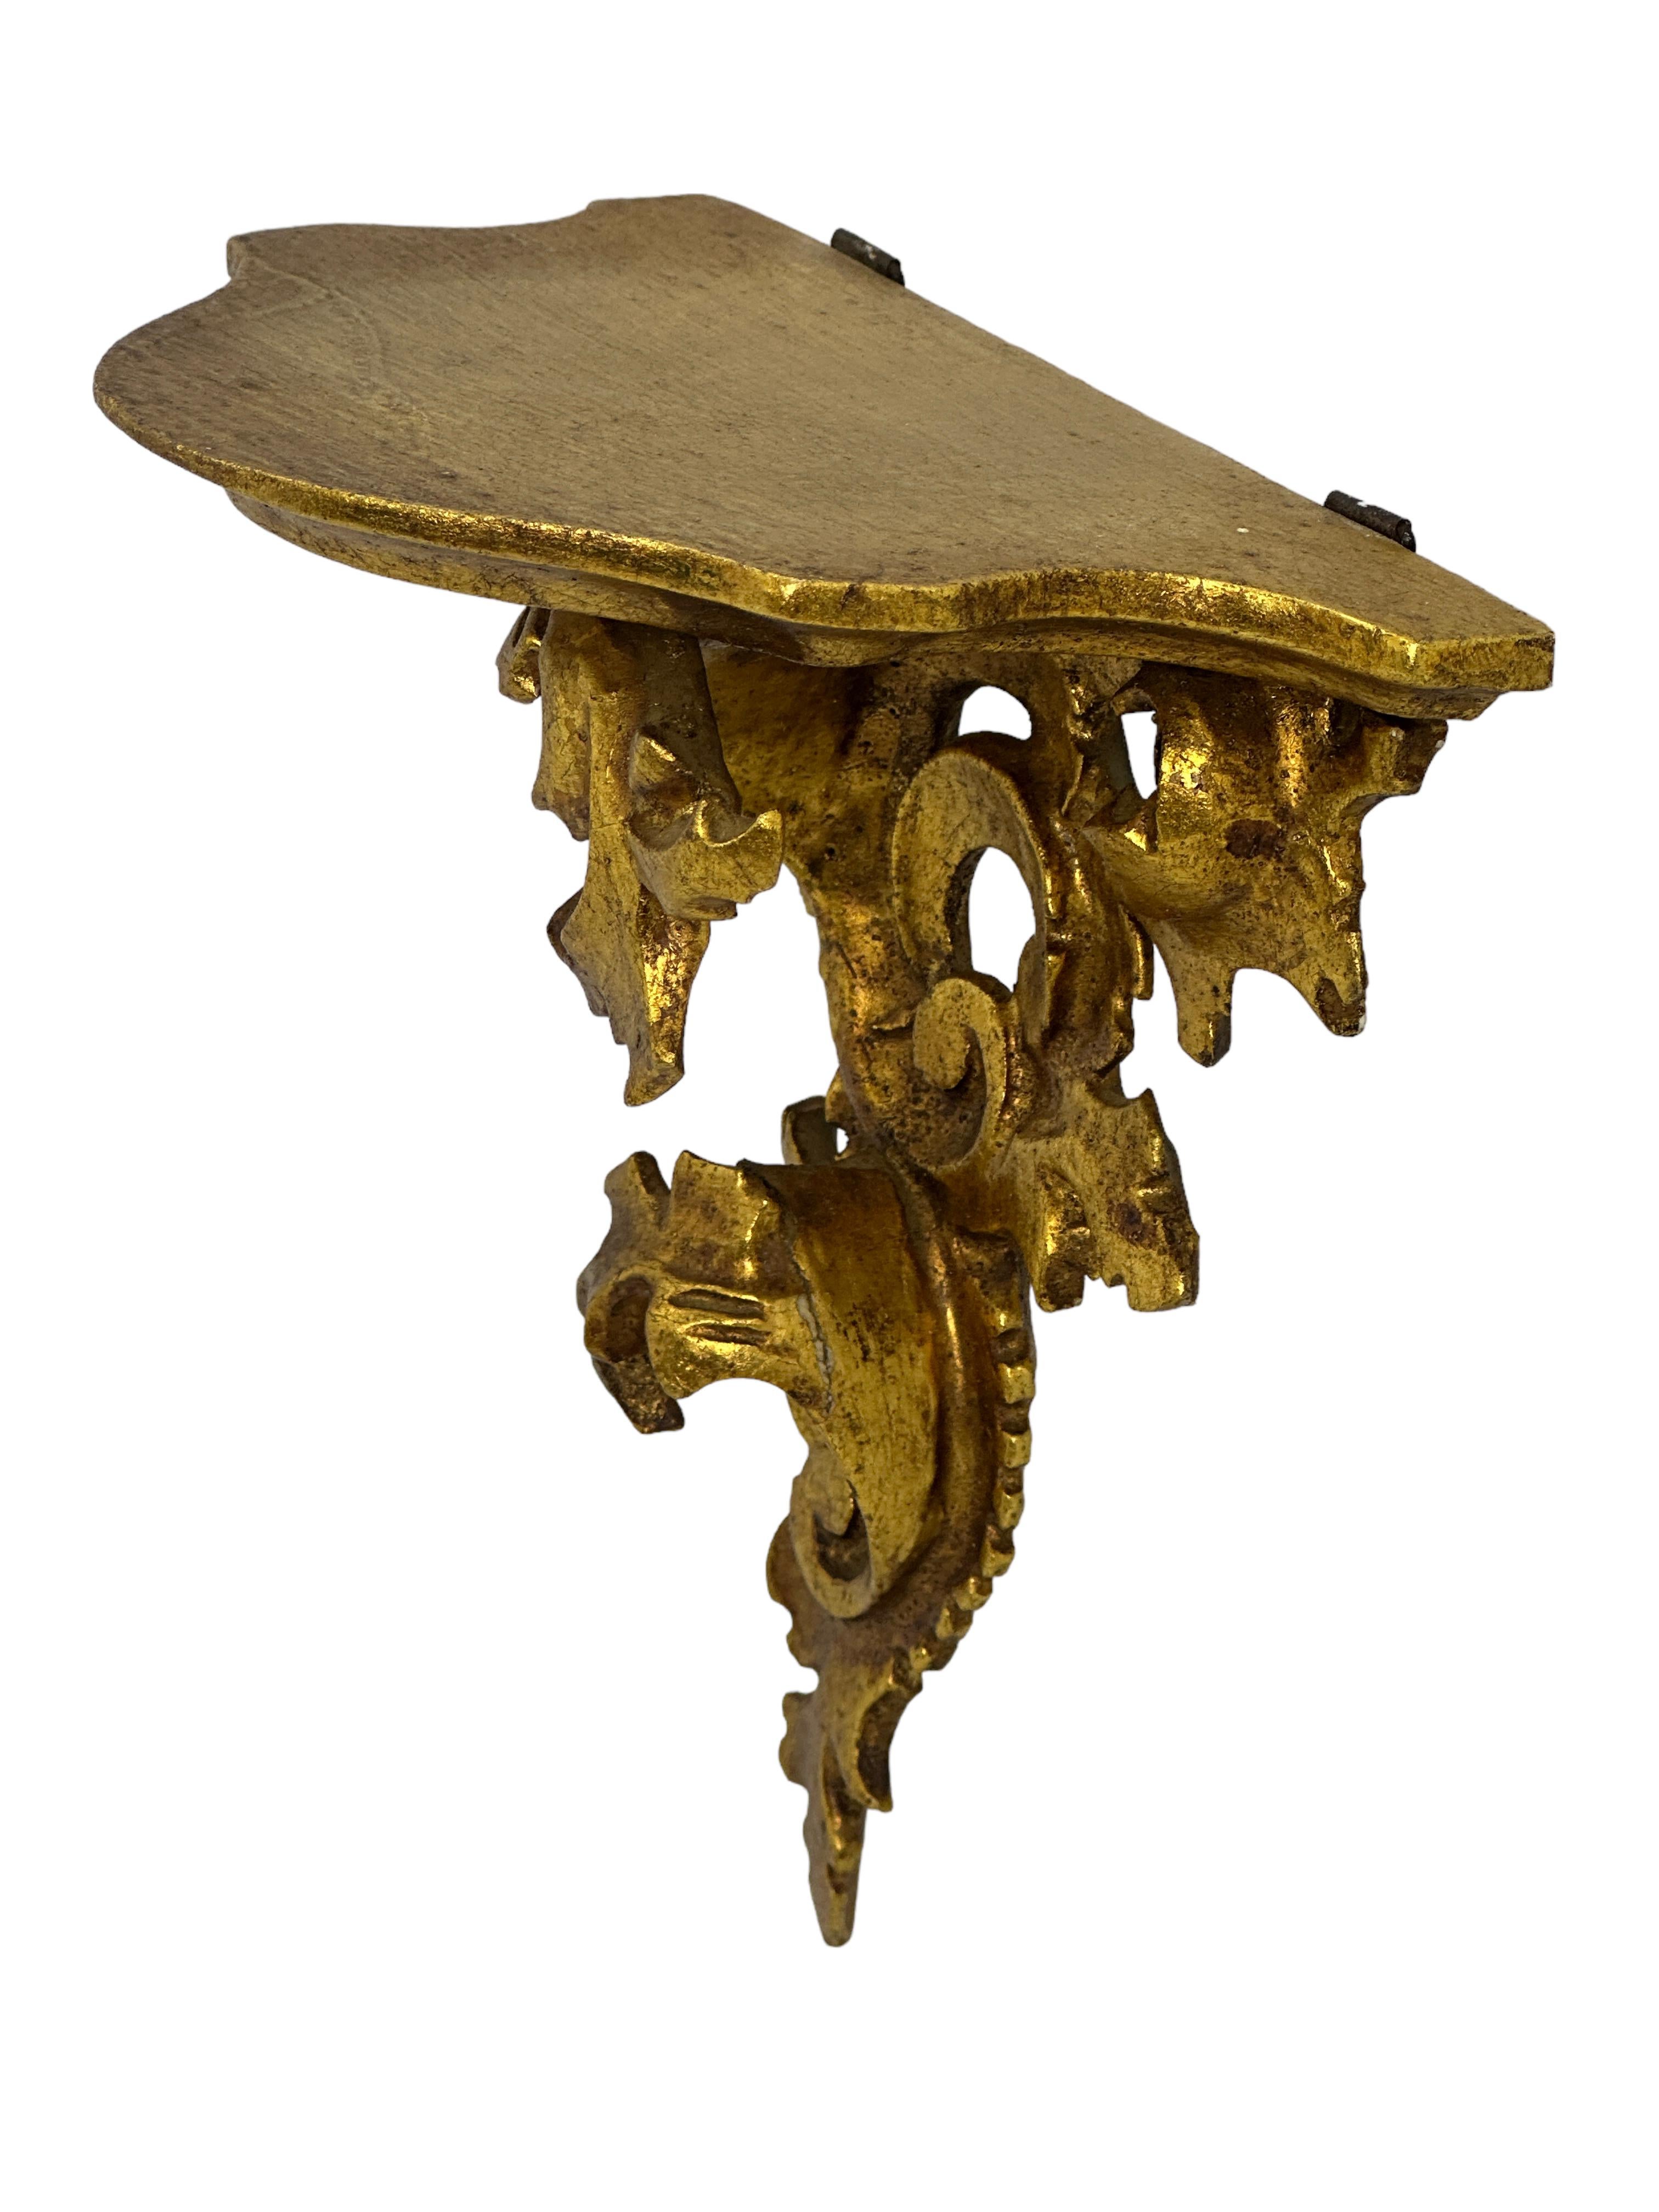 Offered is an absolutely stunning, 1950s Italian gilt wood wall shelf or wall console. Minor patina gives this piece a classy statement. Made of hand carved wood and gold plated. A nice shelf to present a statuette or a beautiful object. A nice